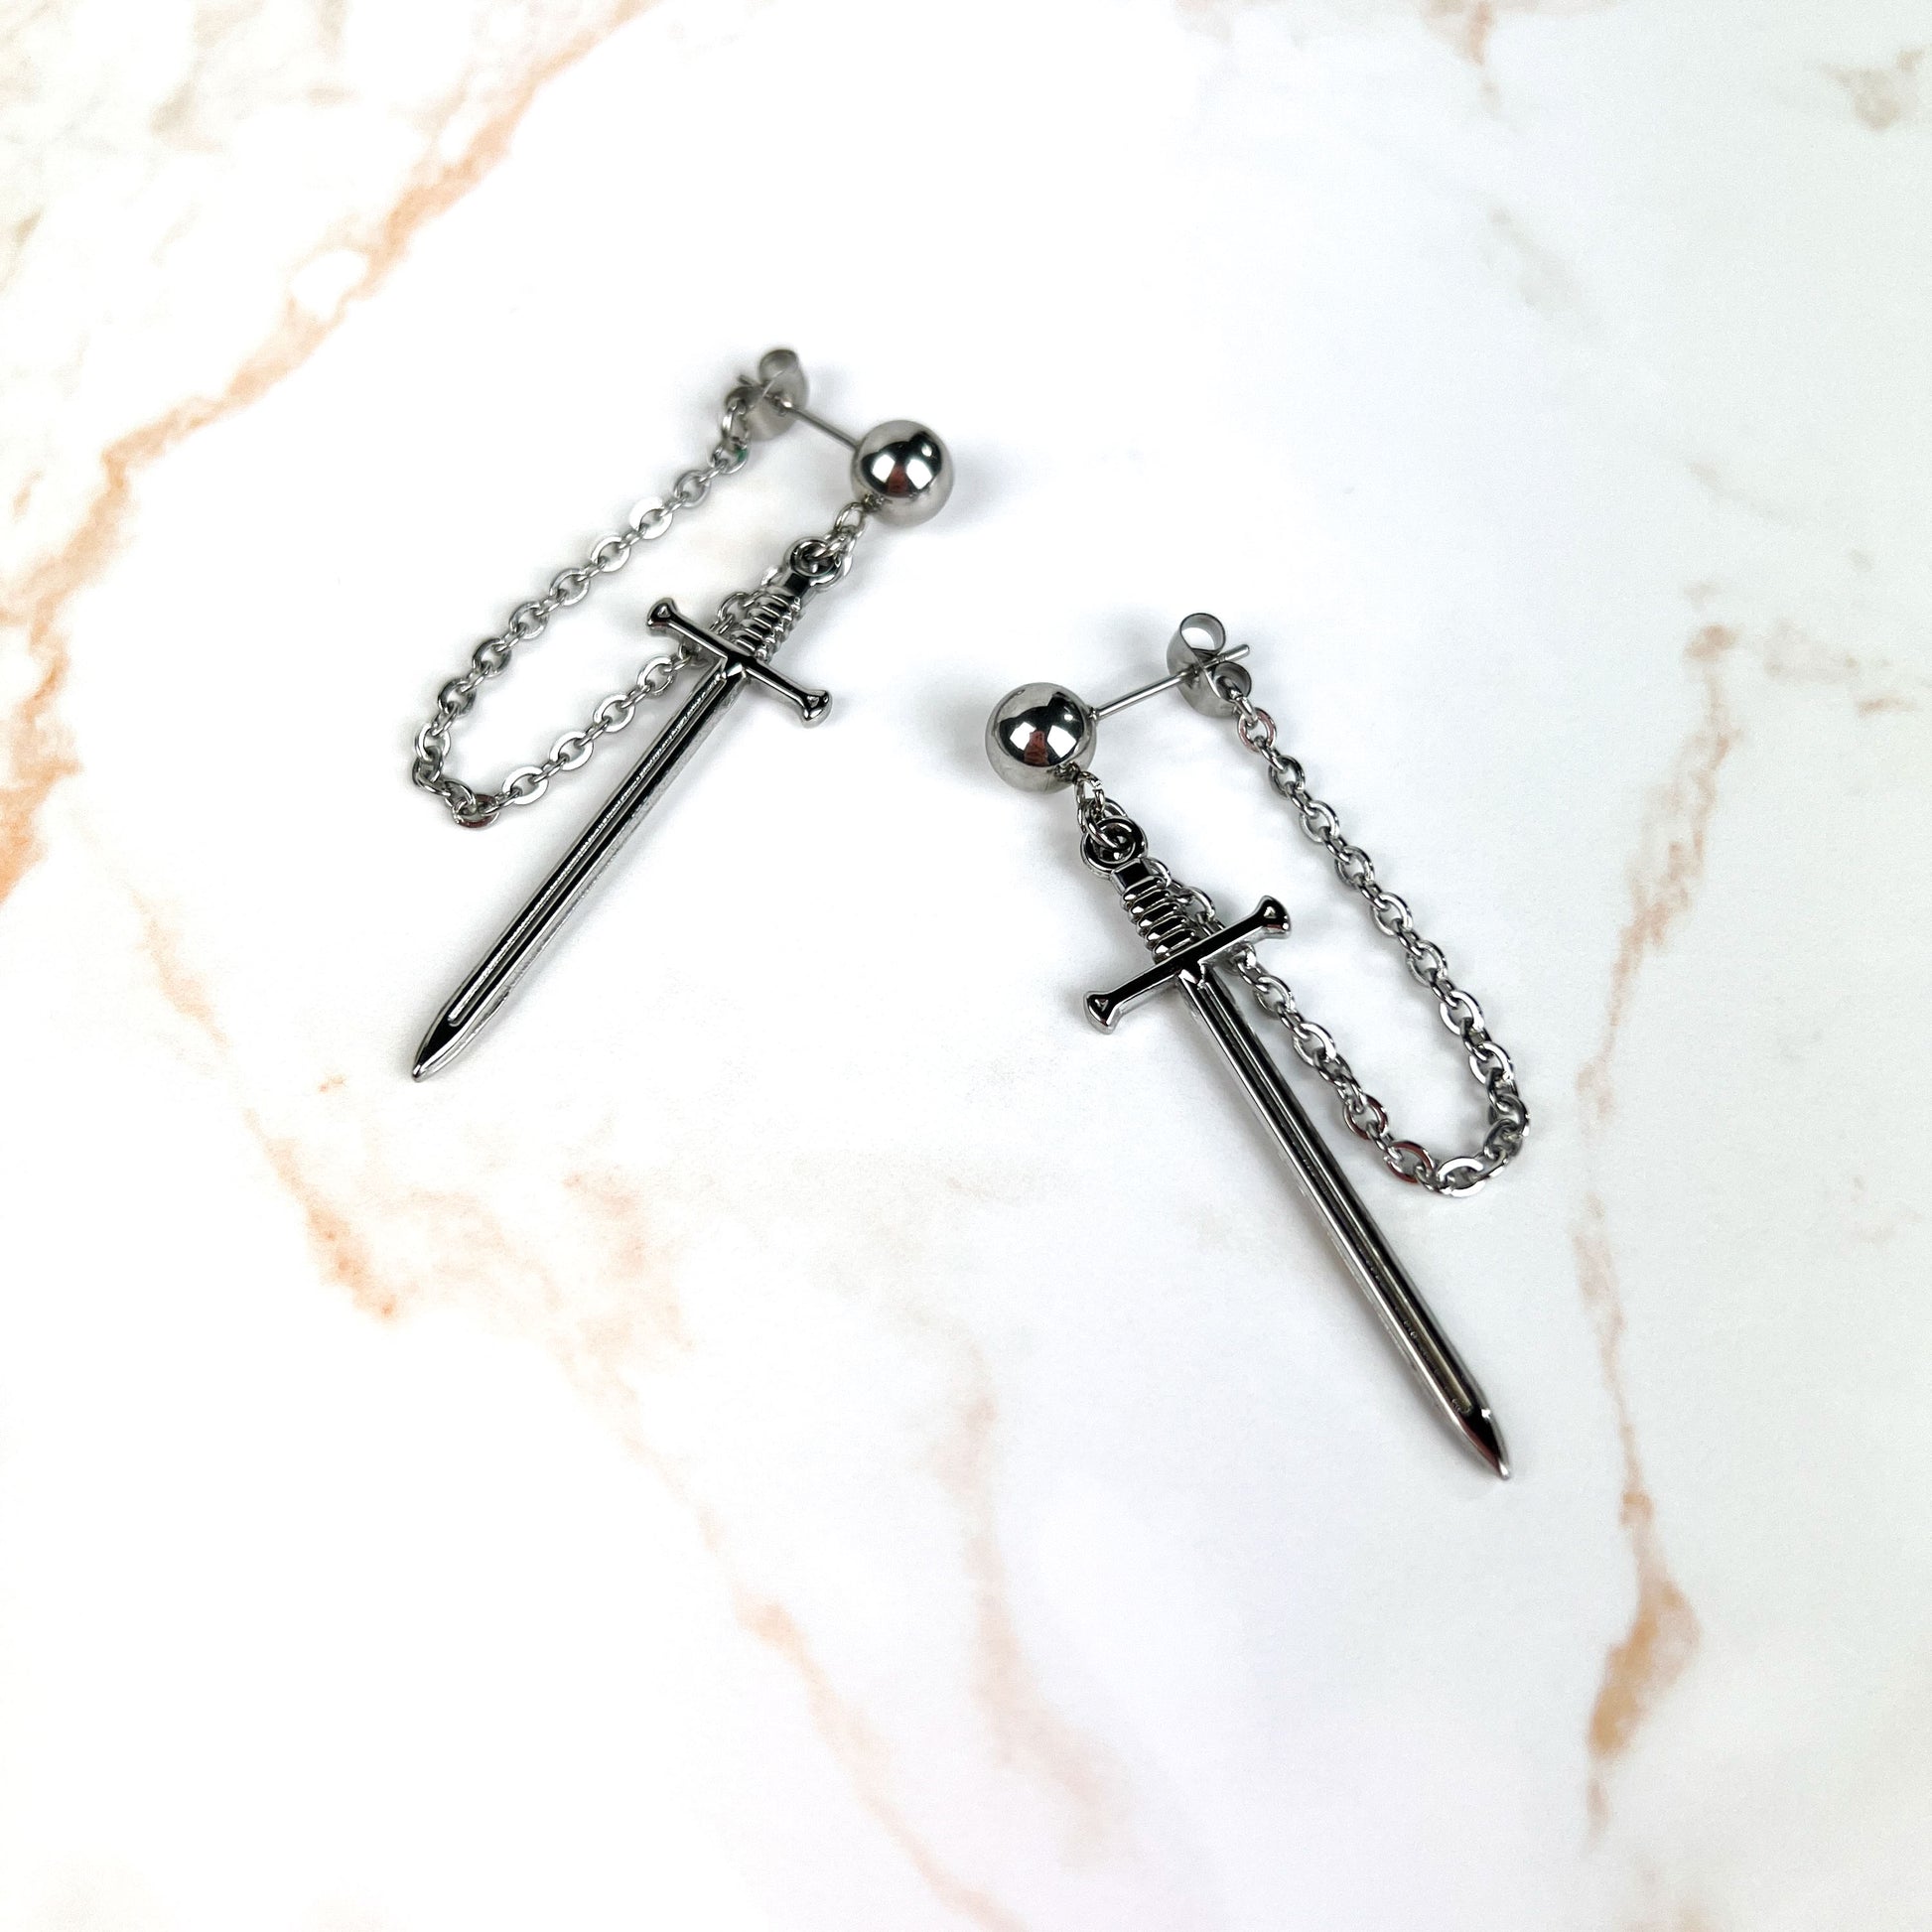 Swords and chains gothic medieval fantasy stainless steel earrings Baguette Magick